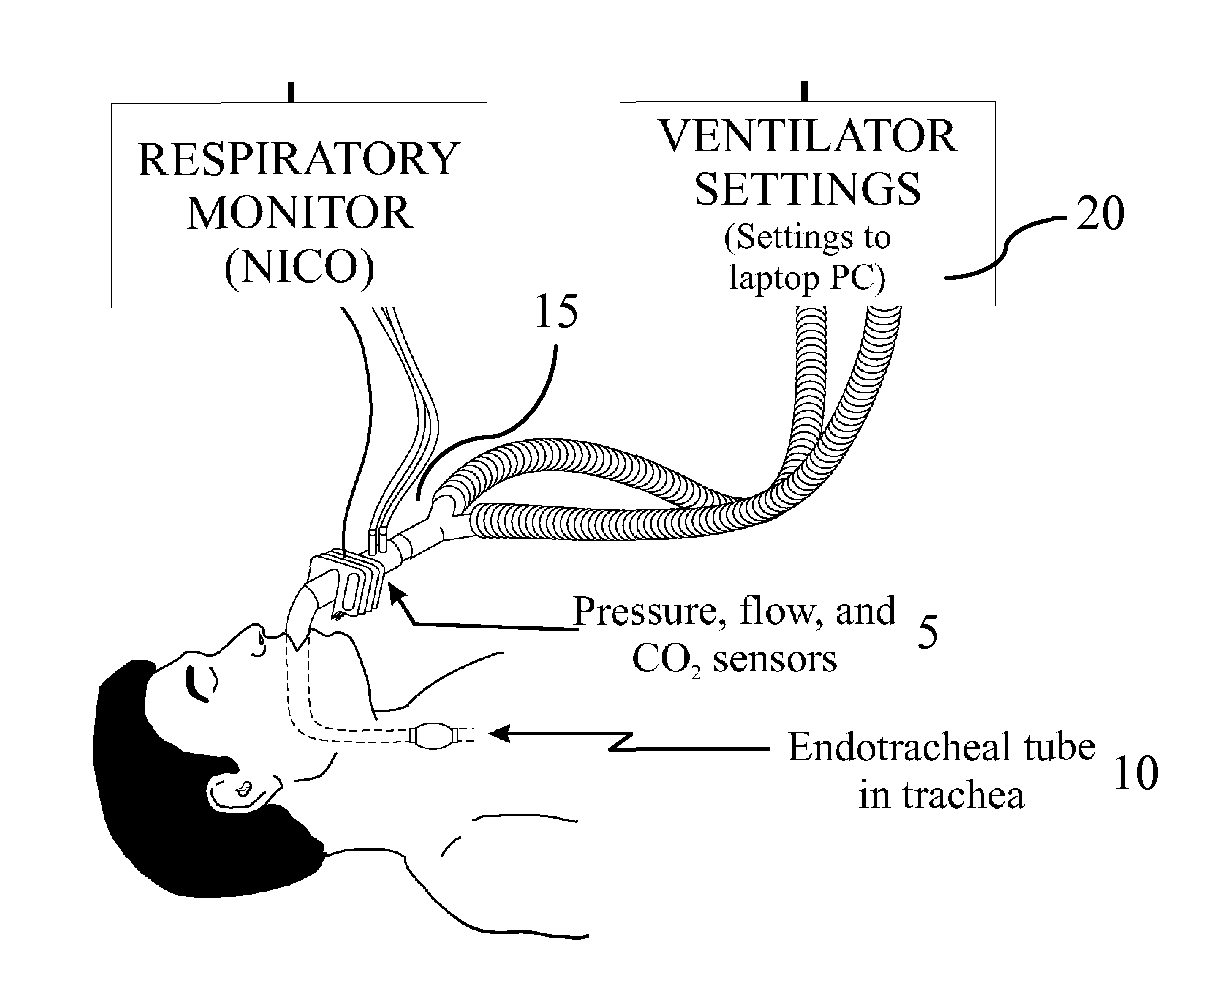 System and Method for Assessing Real Time Pulmonary Mechanics